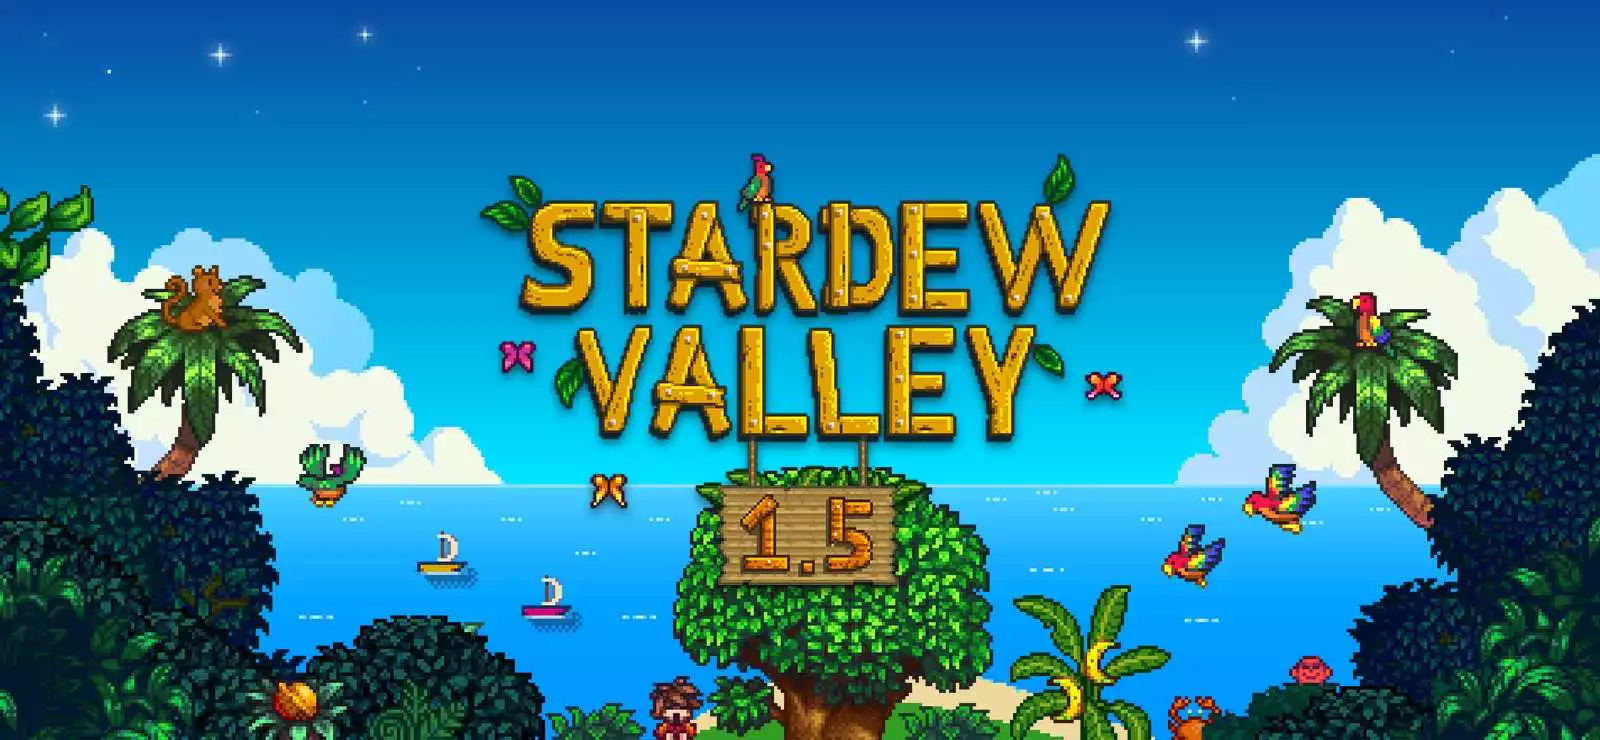 Seed Maker not working in Stardew Valley